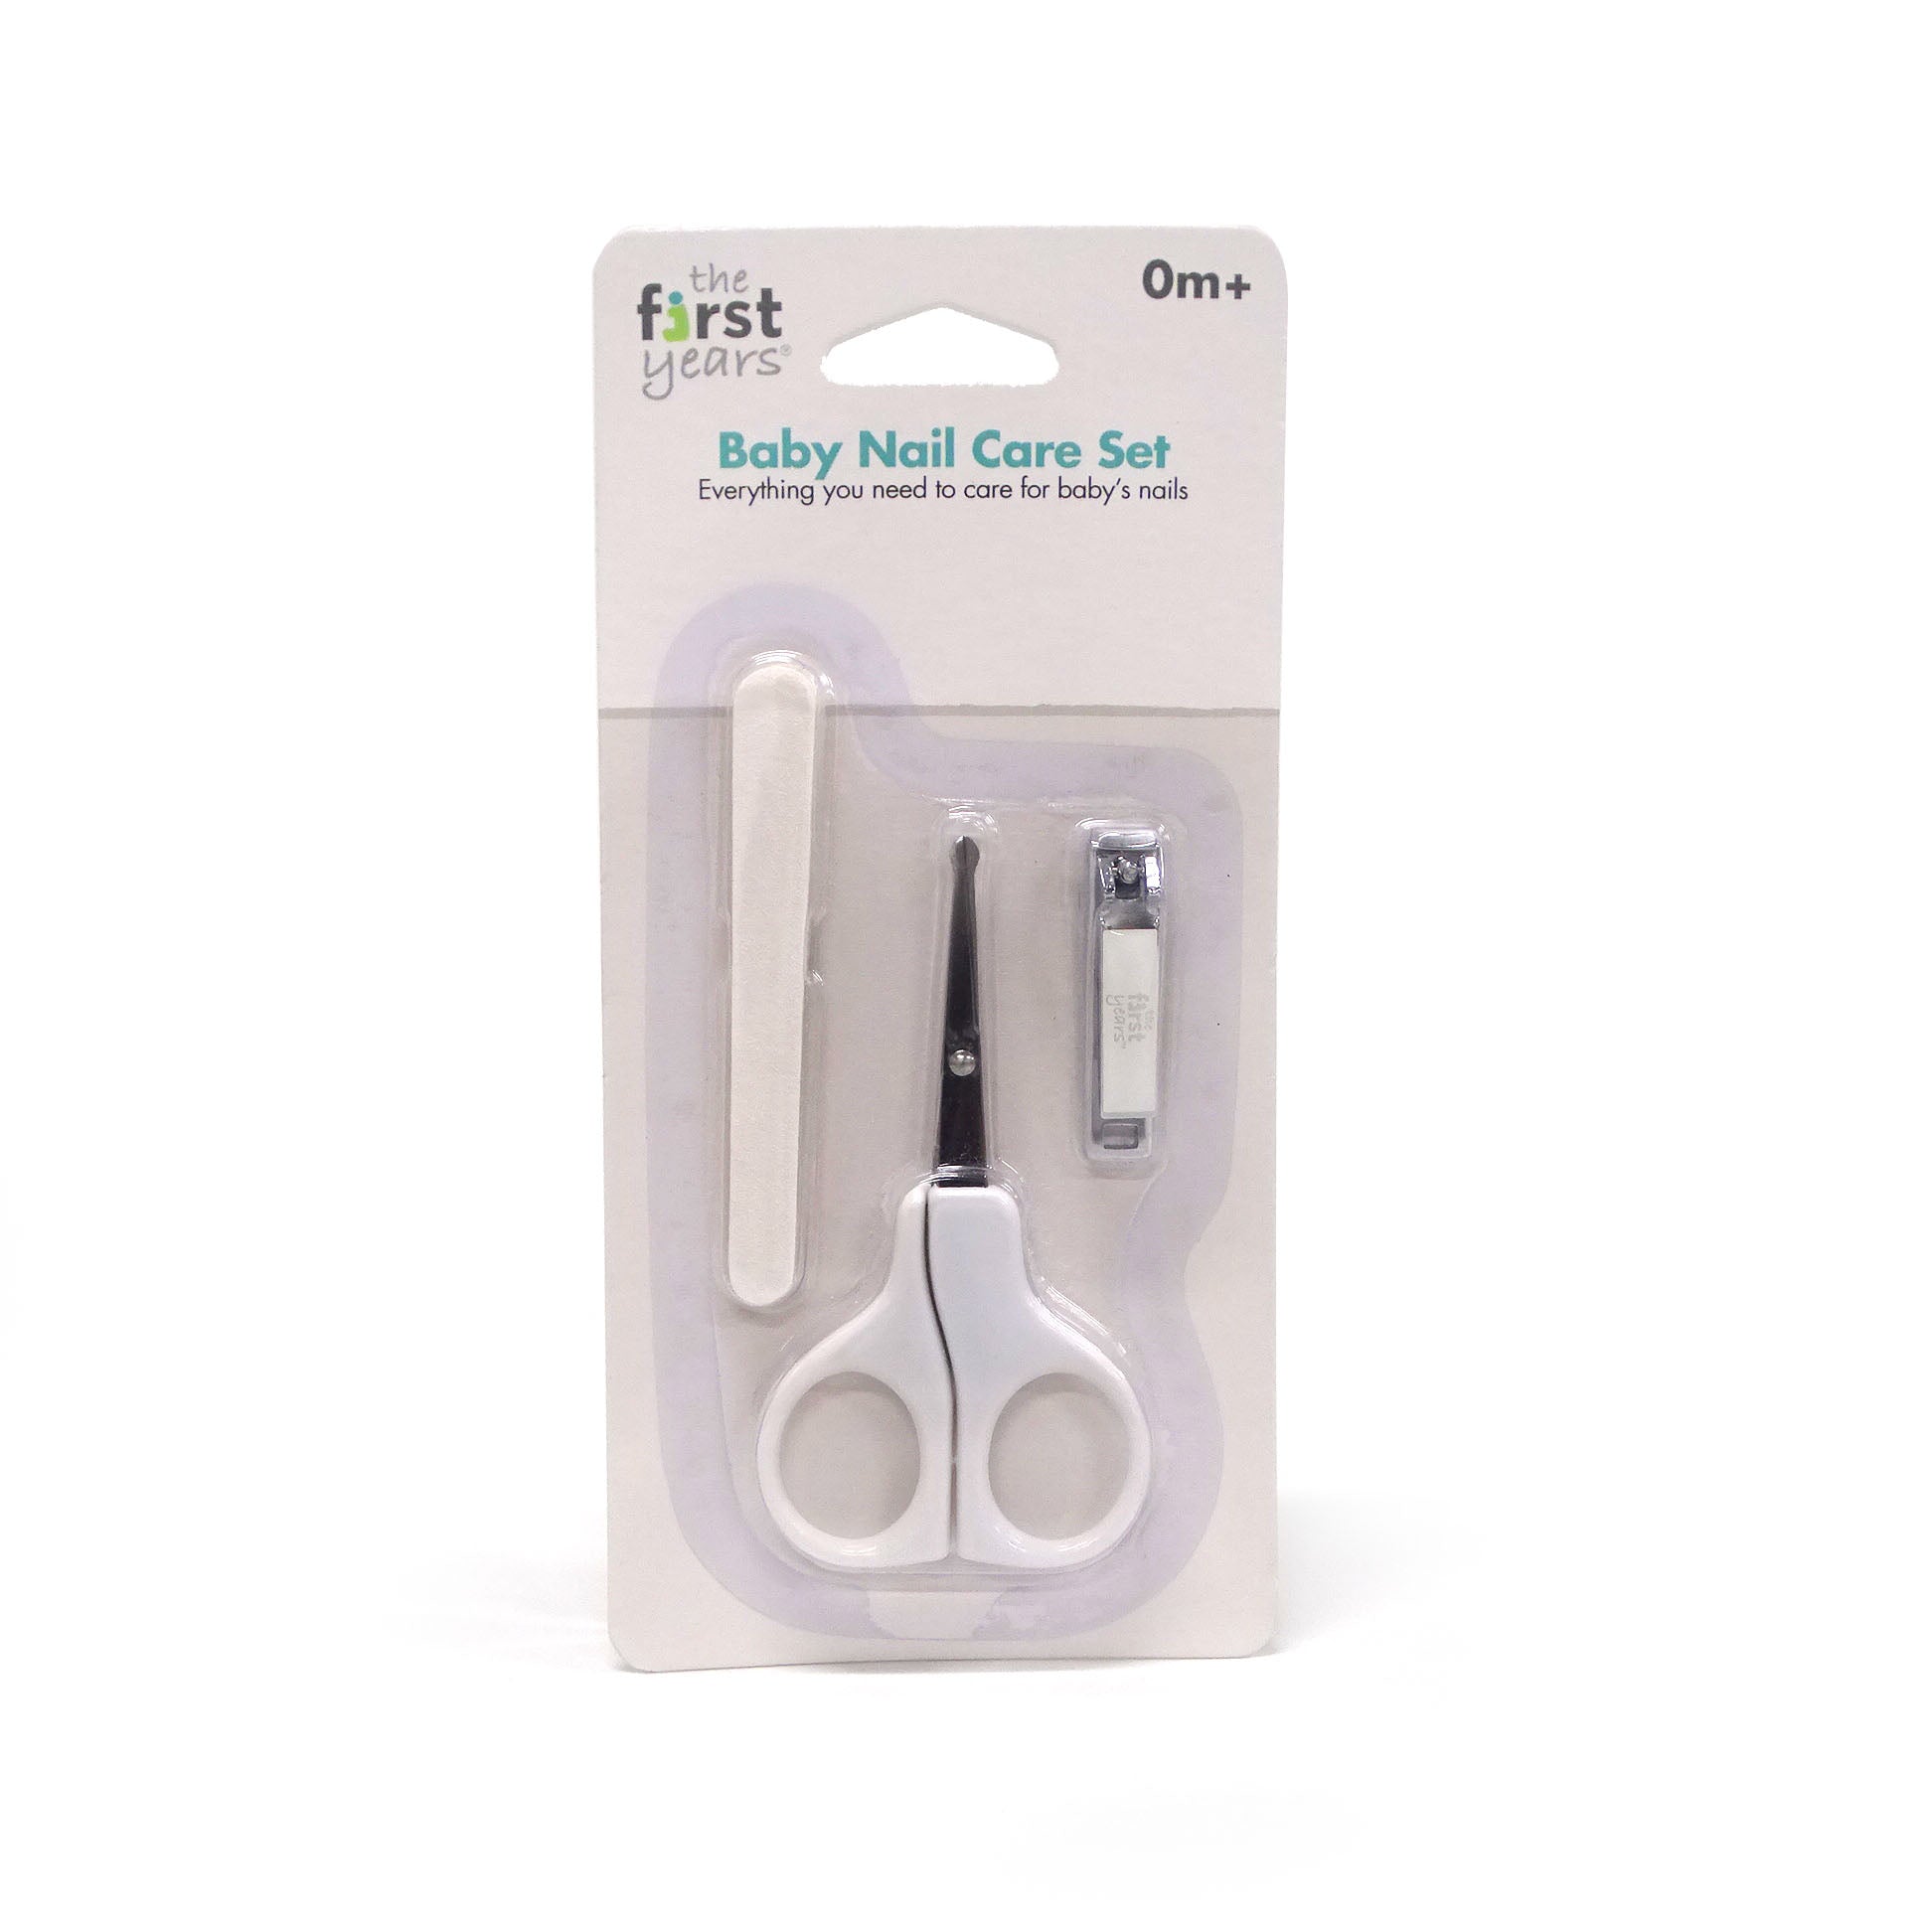 The First Years -Baby Nail Care Set